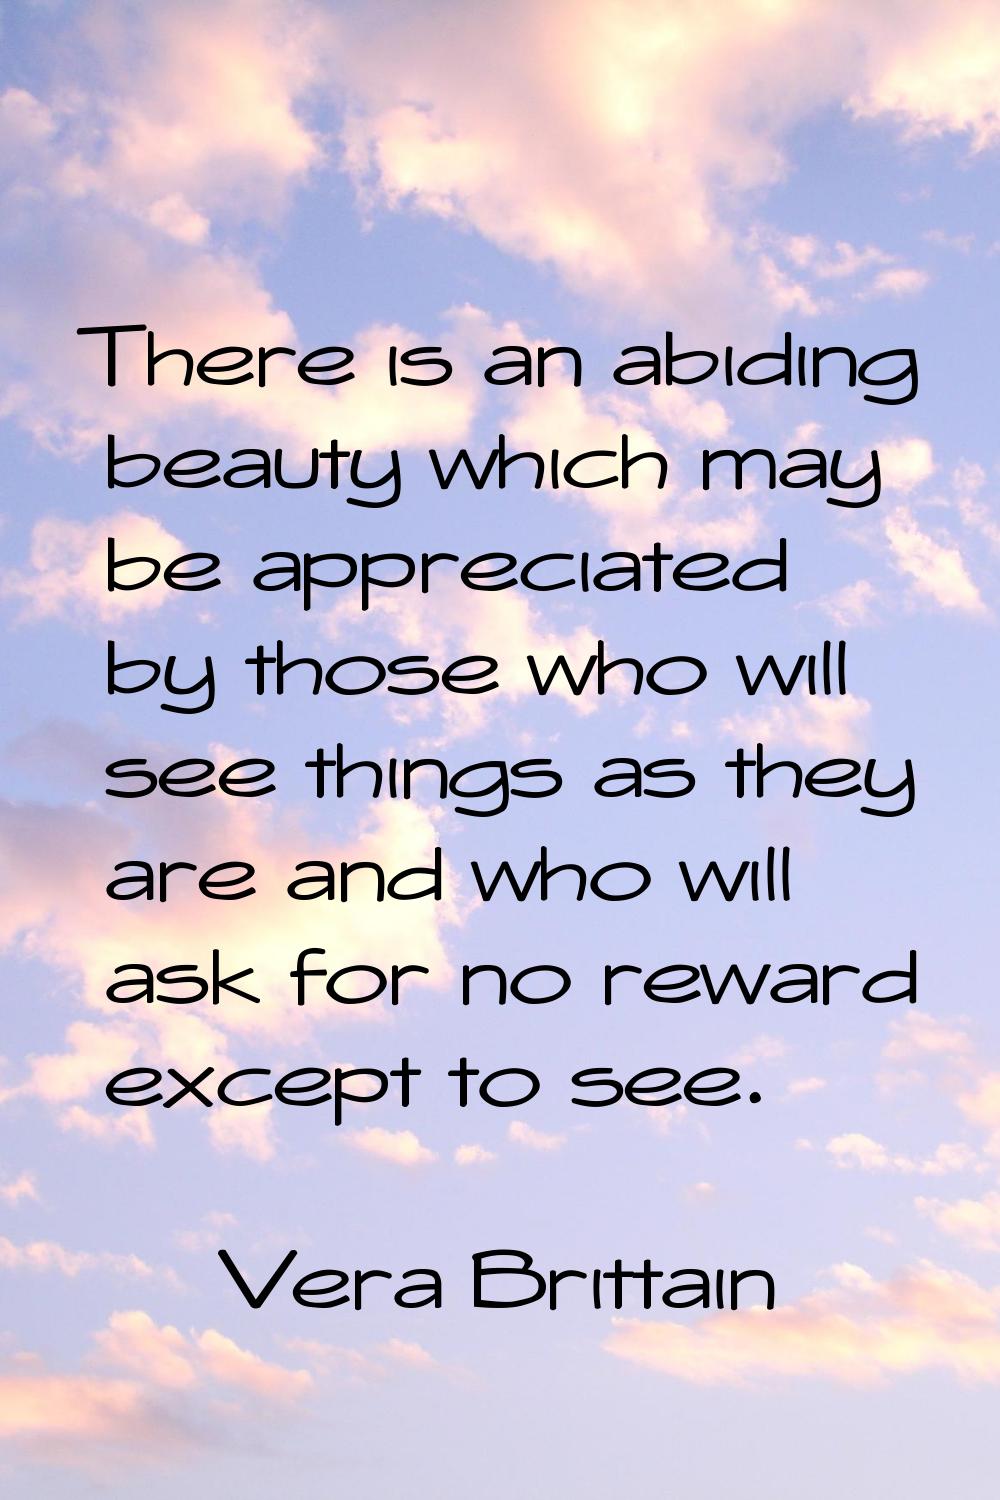 There is an abiding beauty which may be appreciated by those who will see things as they are and wh